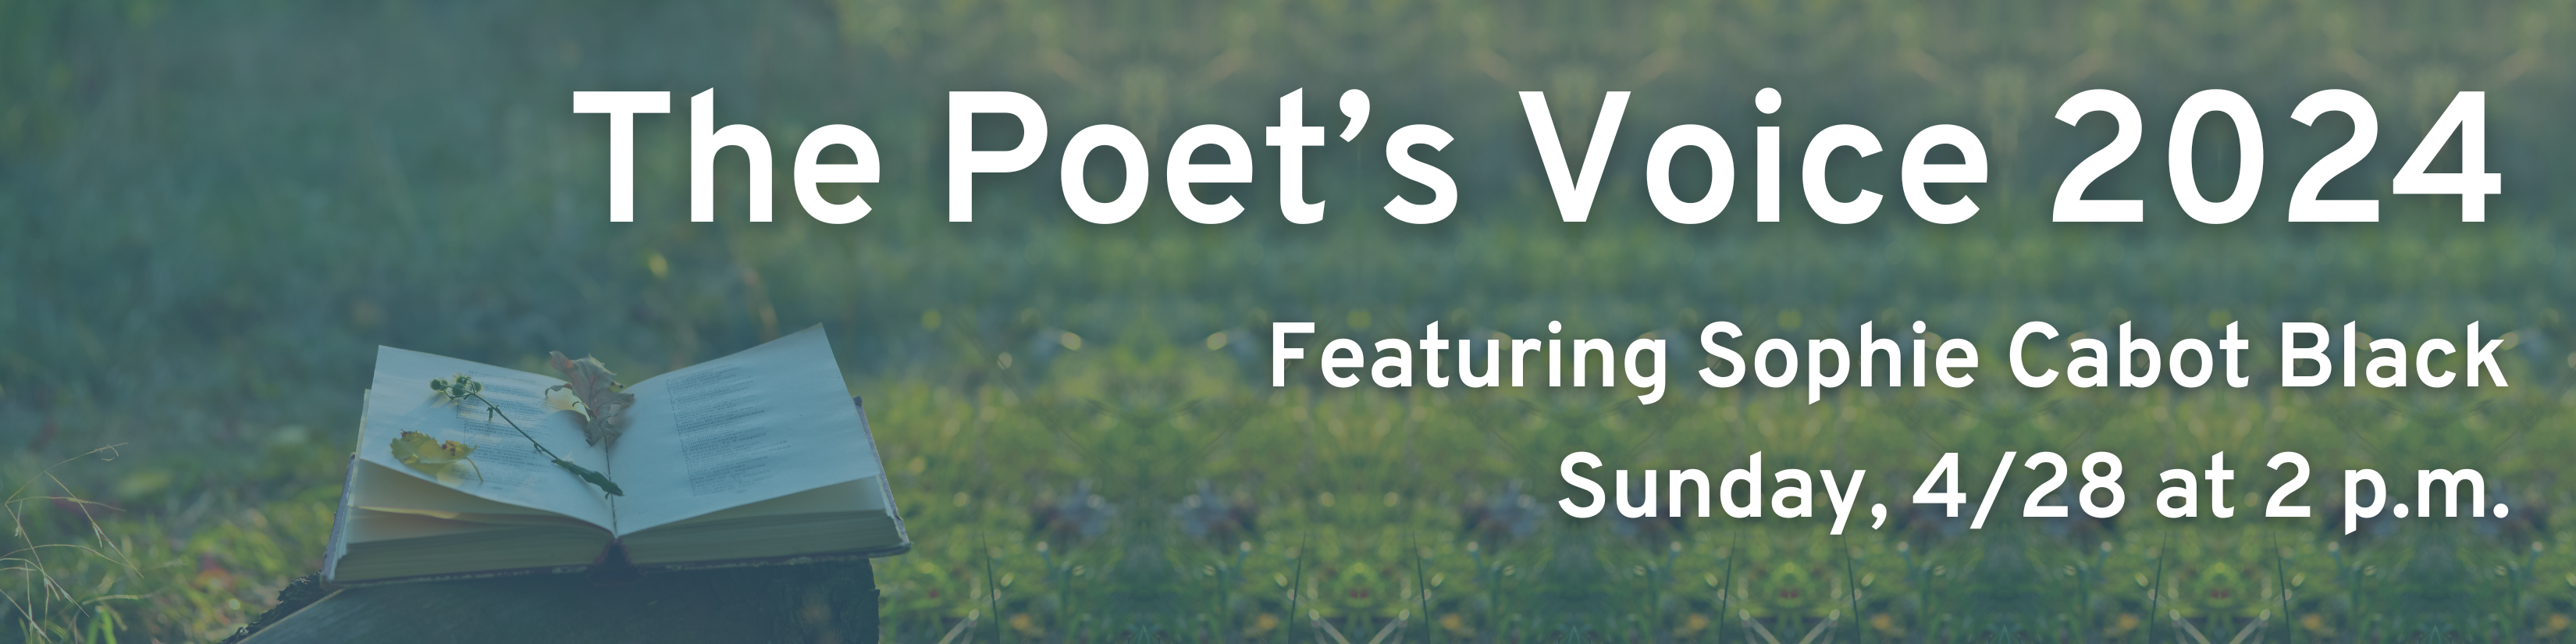 The Poet's Voice 2024, featuring Sophie Cabot Black; Sunday, 4/28 at 2 p.m.